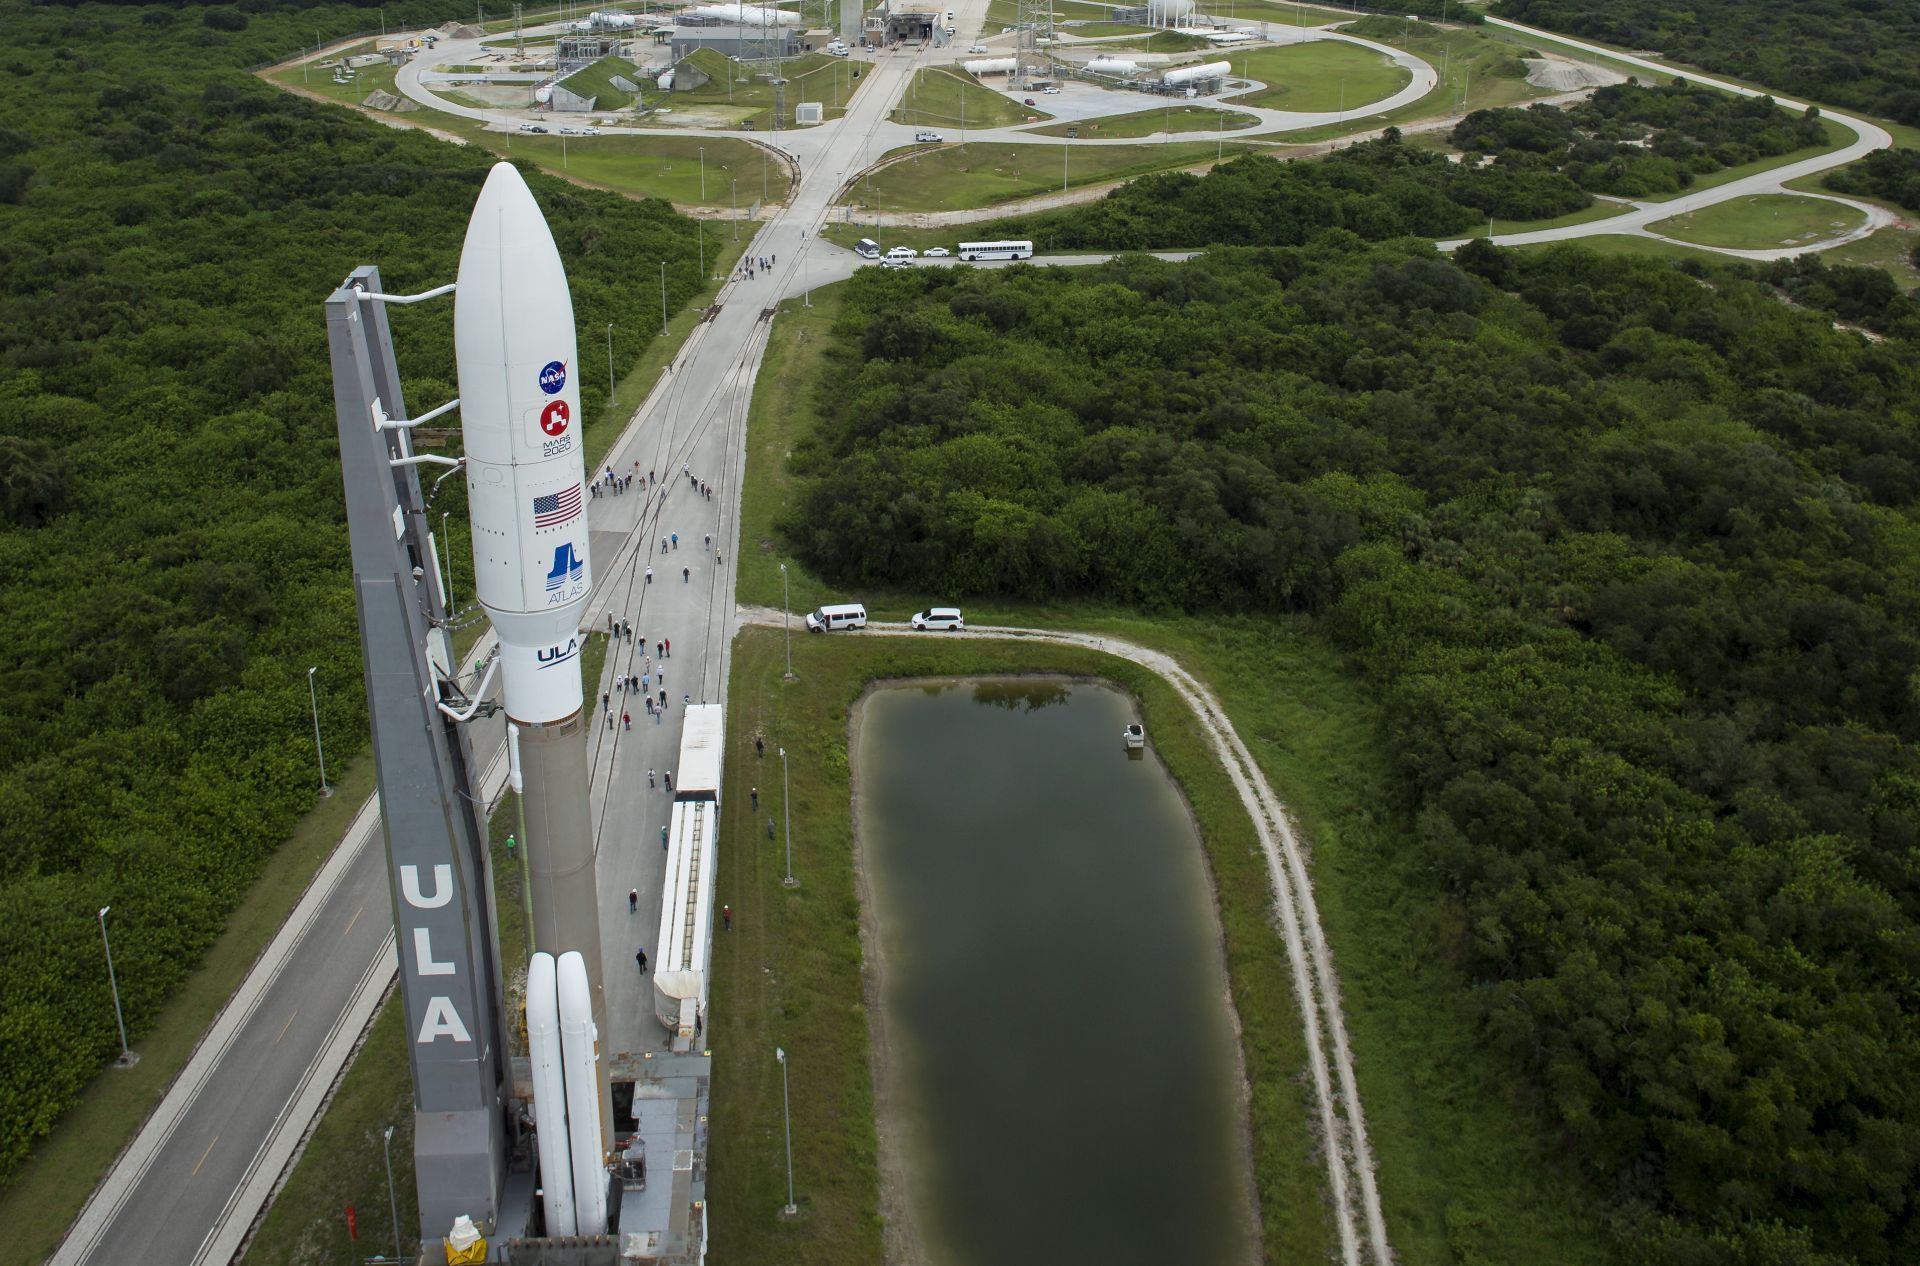 epa08571241 A handout photo made available by NASA shows a United Launch Alliance Atlas V rocket with NASA’s Mars 2020 Perseverance rover onboard as it is rolled out of the Vertical Integration Facility to the launch pad at Space Launch Complex 41, at Cape Canaveral Air Force Station in Florida, USA, 28 July 2020. The Perseverance rover is part of NASA’s Mars Exploration Program, a long-term effort of robotic exploration of the Red Planet. Launch is scheduled for 30 July.  EPA/NASA/Joel Kowsky HANDOUT MANDATORY CREDIT: (NASA/Joel Kowsky) HANDOUT EDITORIAL USE ONLY/NO SALES